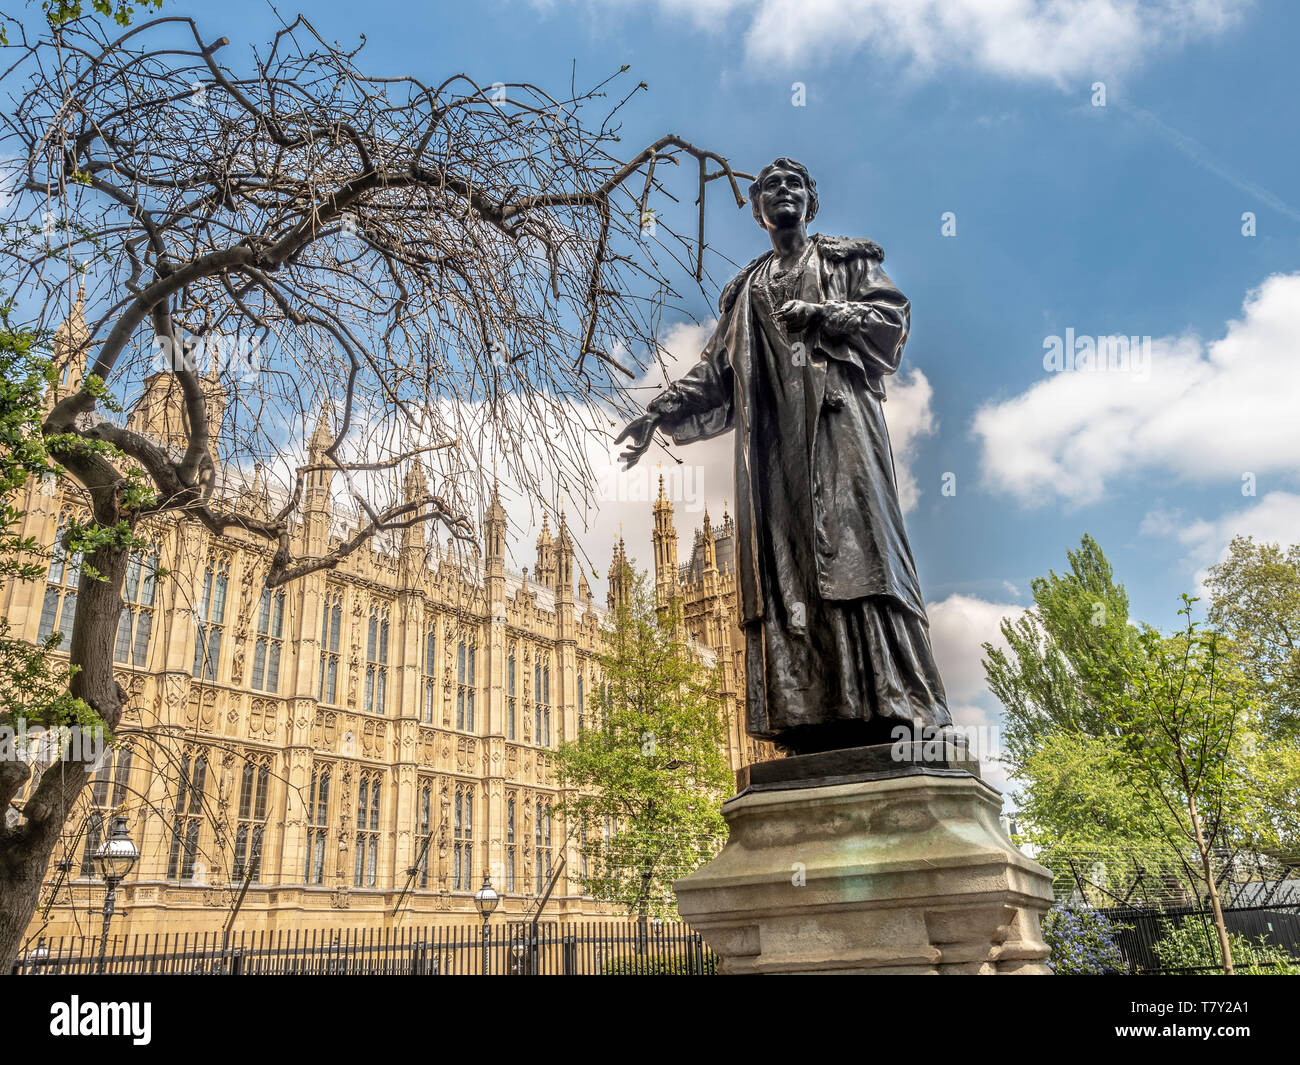 Bronze statue of Emmeline Pankhurst by Arthur George Walker in the Victoria Tower Gardens, Westminster, London, UK. Unveiled in 1930. Stock Photo